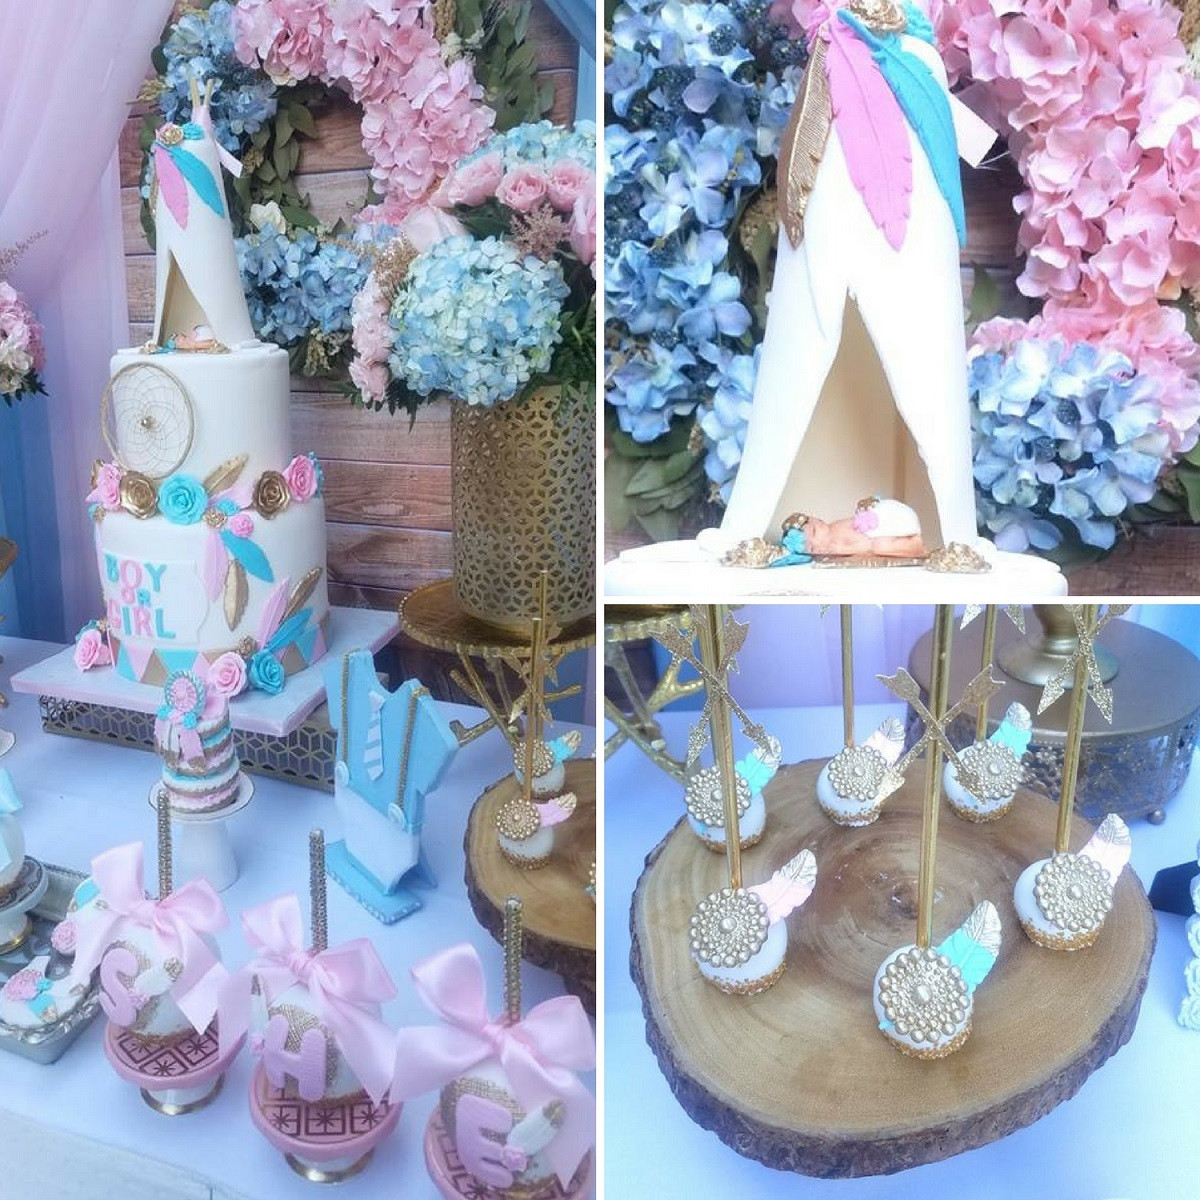 Best Gender Reveal Party Ideas
 Boho Gender Reveal Party Baby Shower Ideas Themes Games